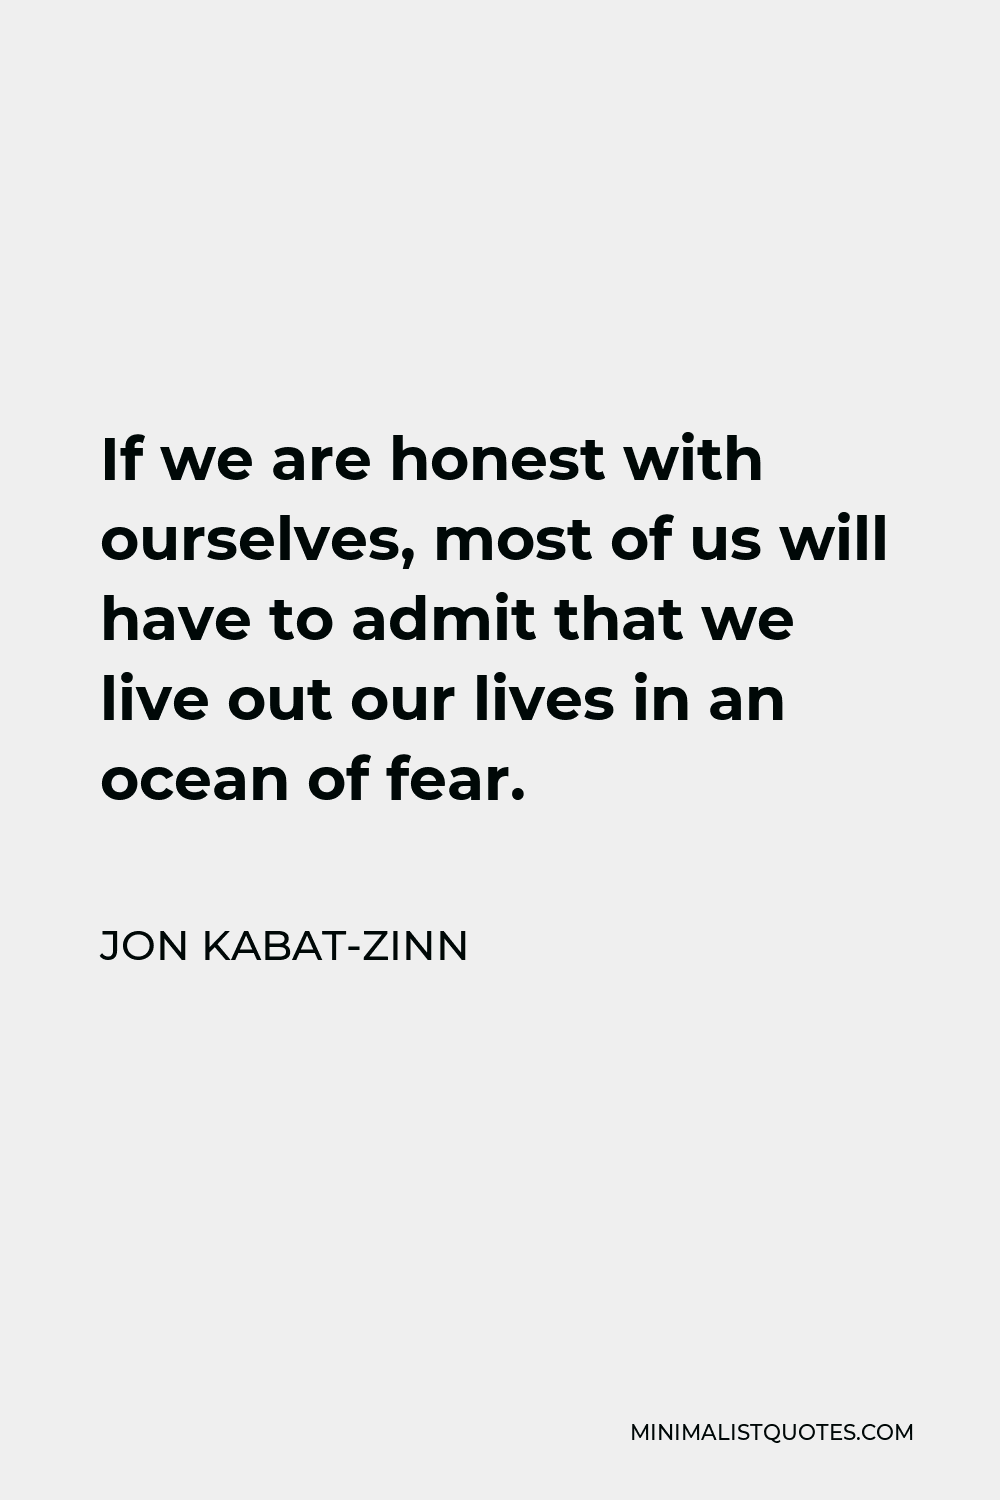 Jon Kabat-Zinn Quote - If we are honest with ourselves, most of us will have to admit that we live out our lives in an ocean of fear.